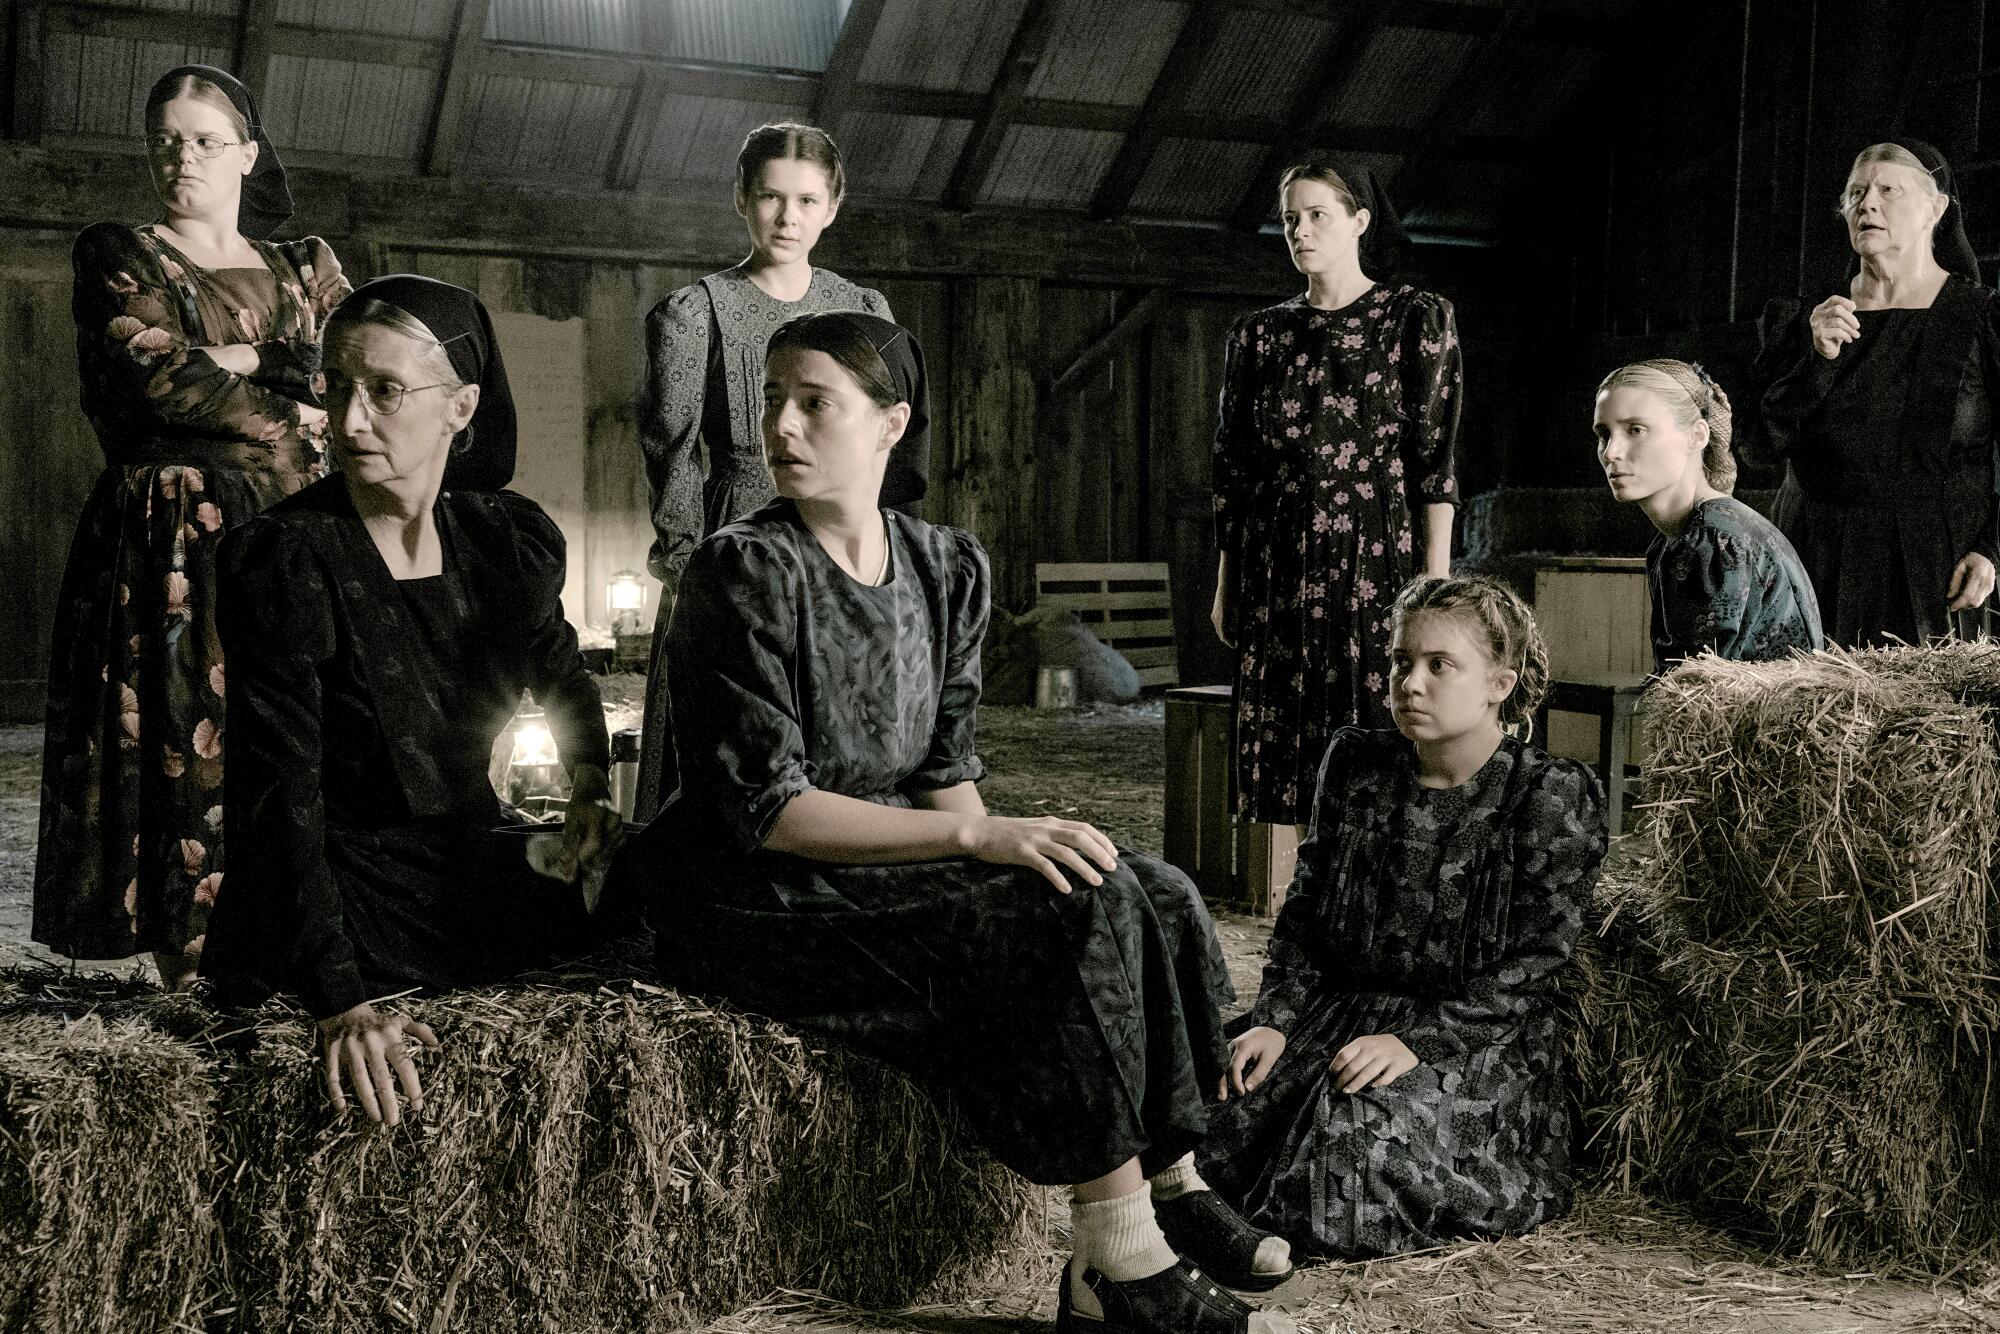 A group of conservatively dressed women and girls sit in a hayloft in a scene from "Women Talking."